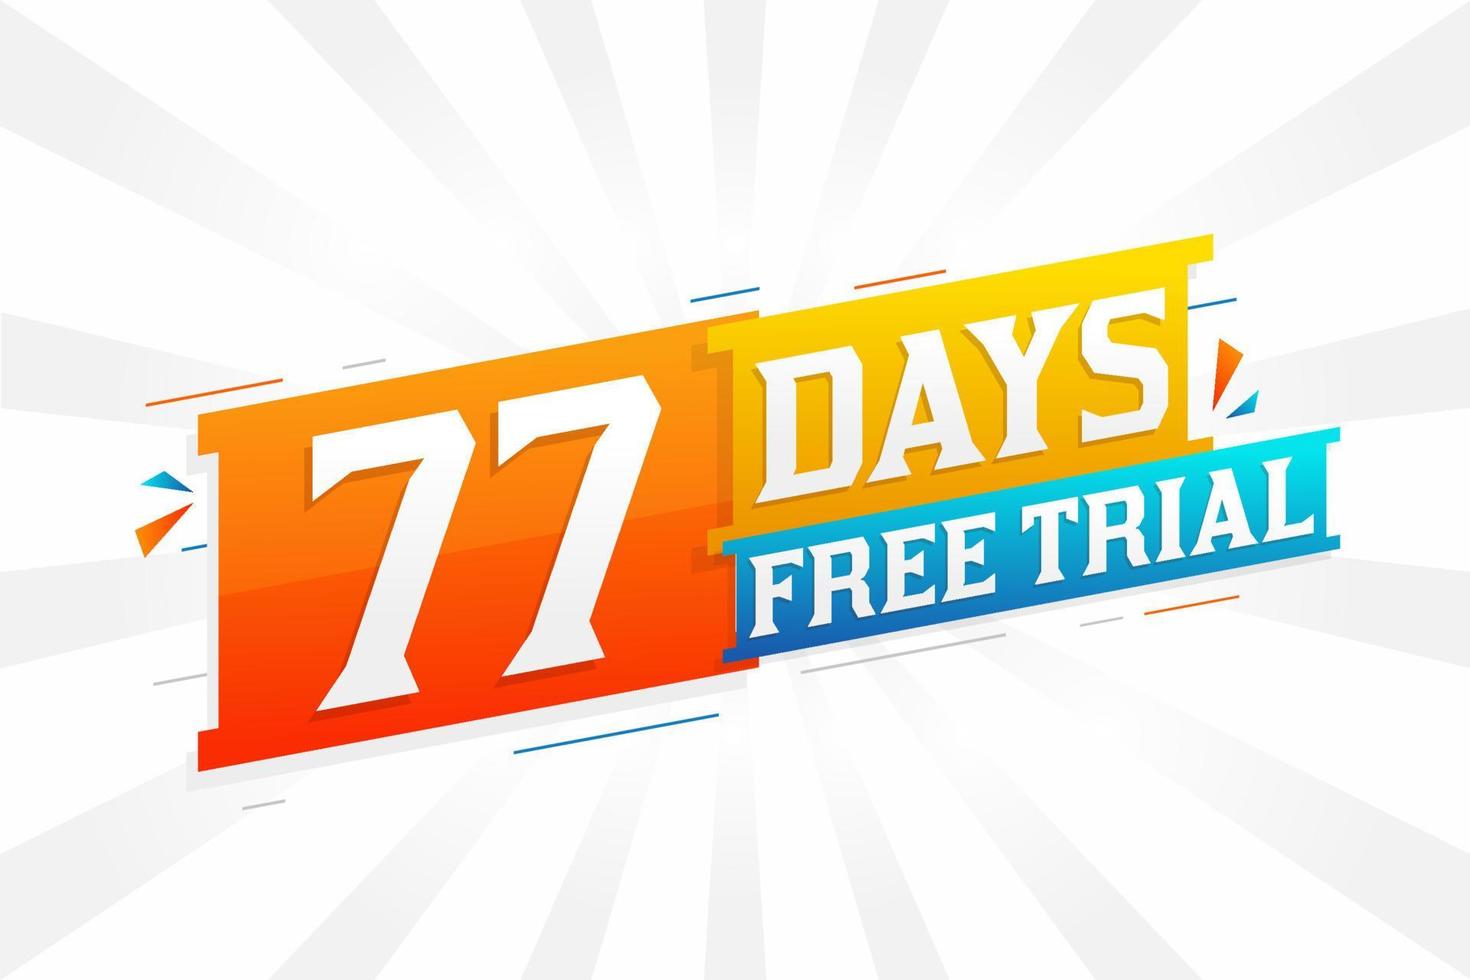 77 Days free Trial promotional bold text stock vector